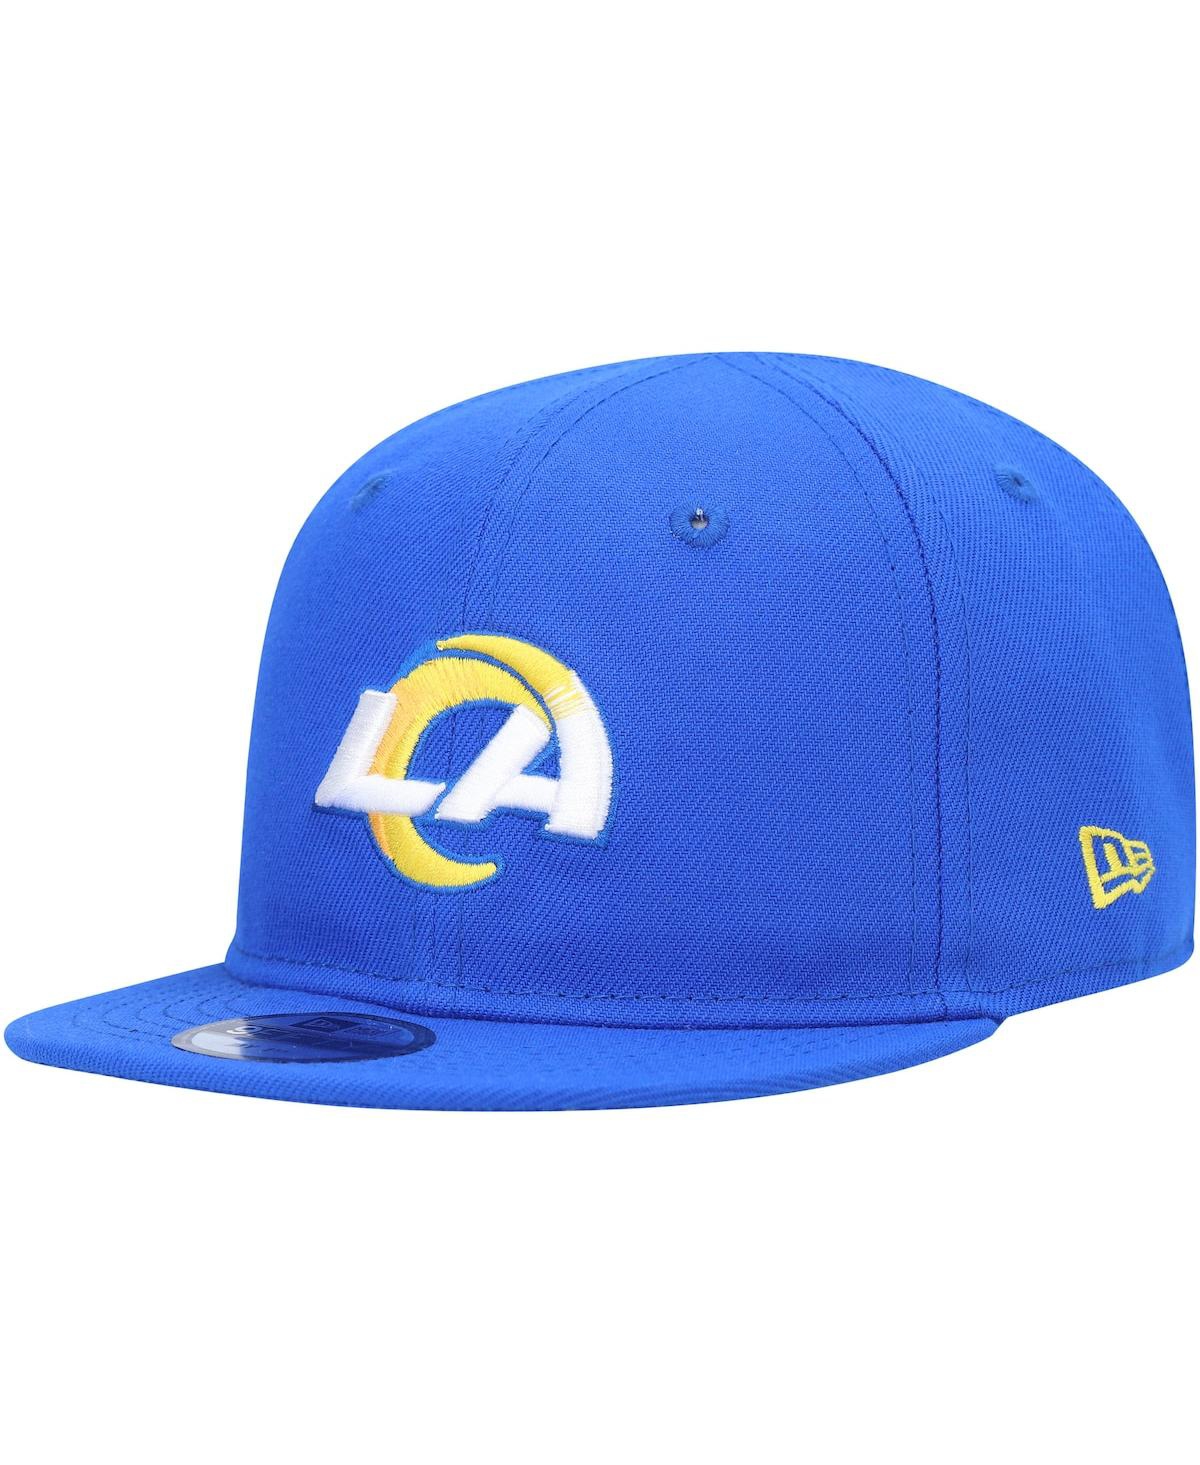 New Era Babies' Infant Boys And Girls  Royal Los Angeles Rams My 1st 9fifty Snapback Hat